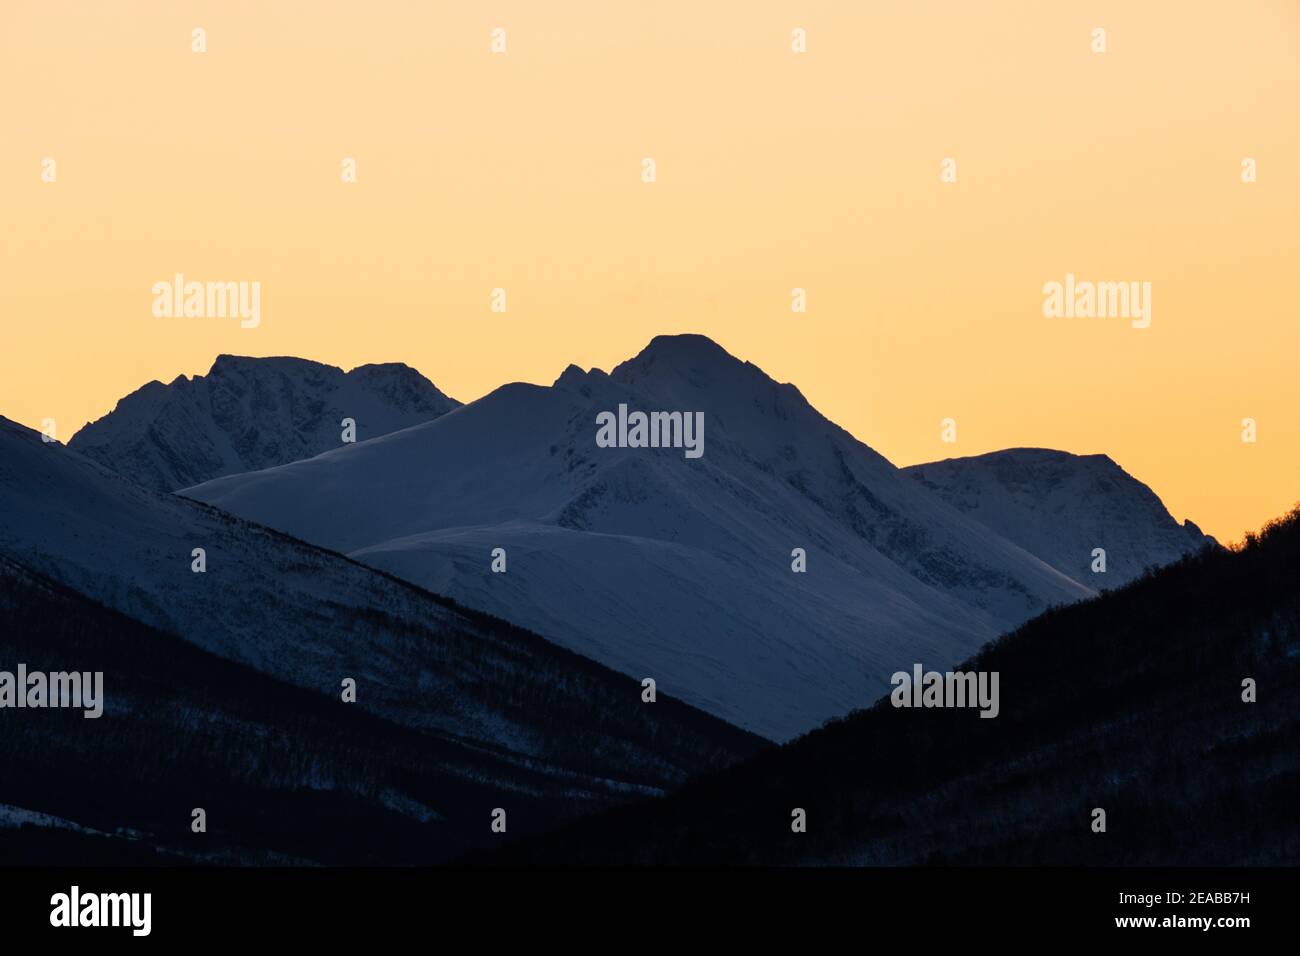 Norway, Nord-Norge, Winter, Mountain, Peaks, Sunset, Sky, Snow Stock Photo